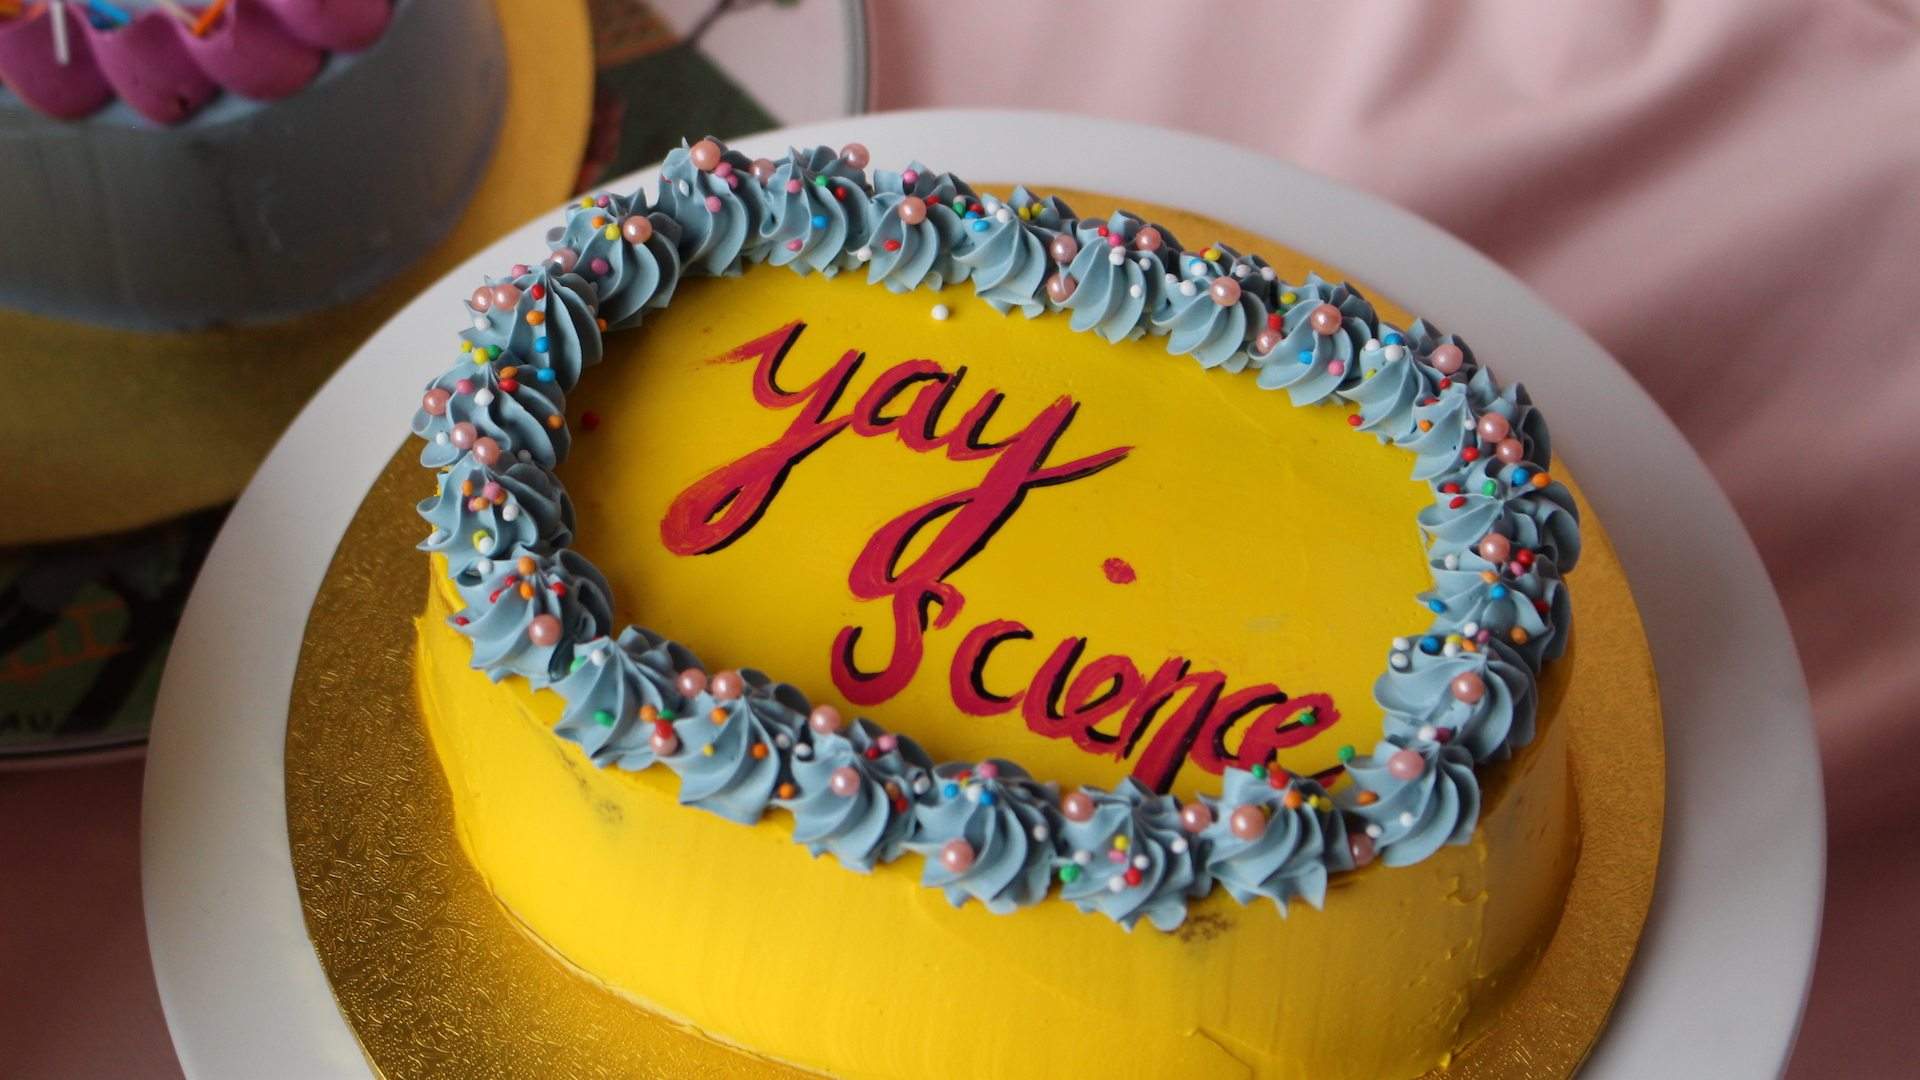 Local Bakery Beurre Is Serving Up a New Line of Cheerful Post-Vax Celebration Cakes